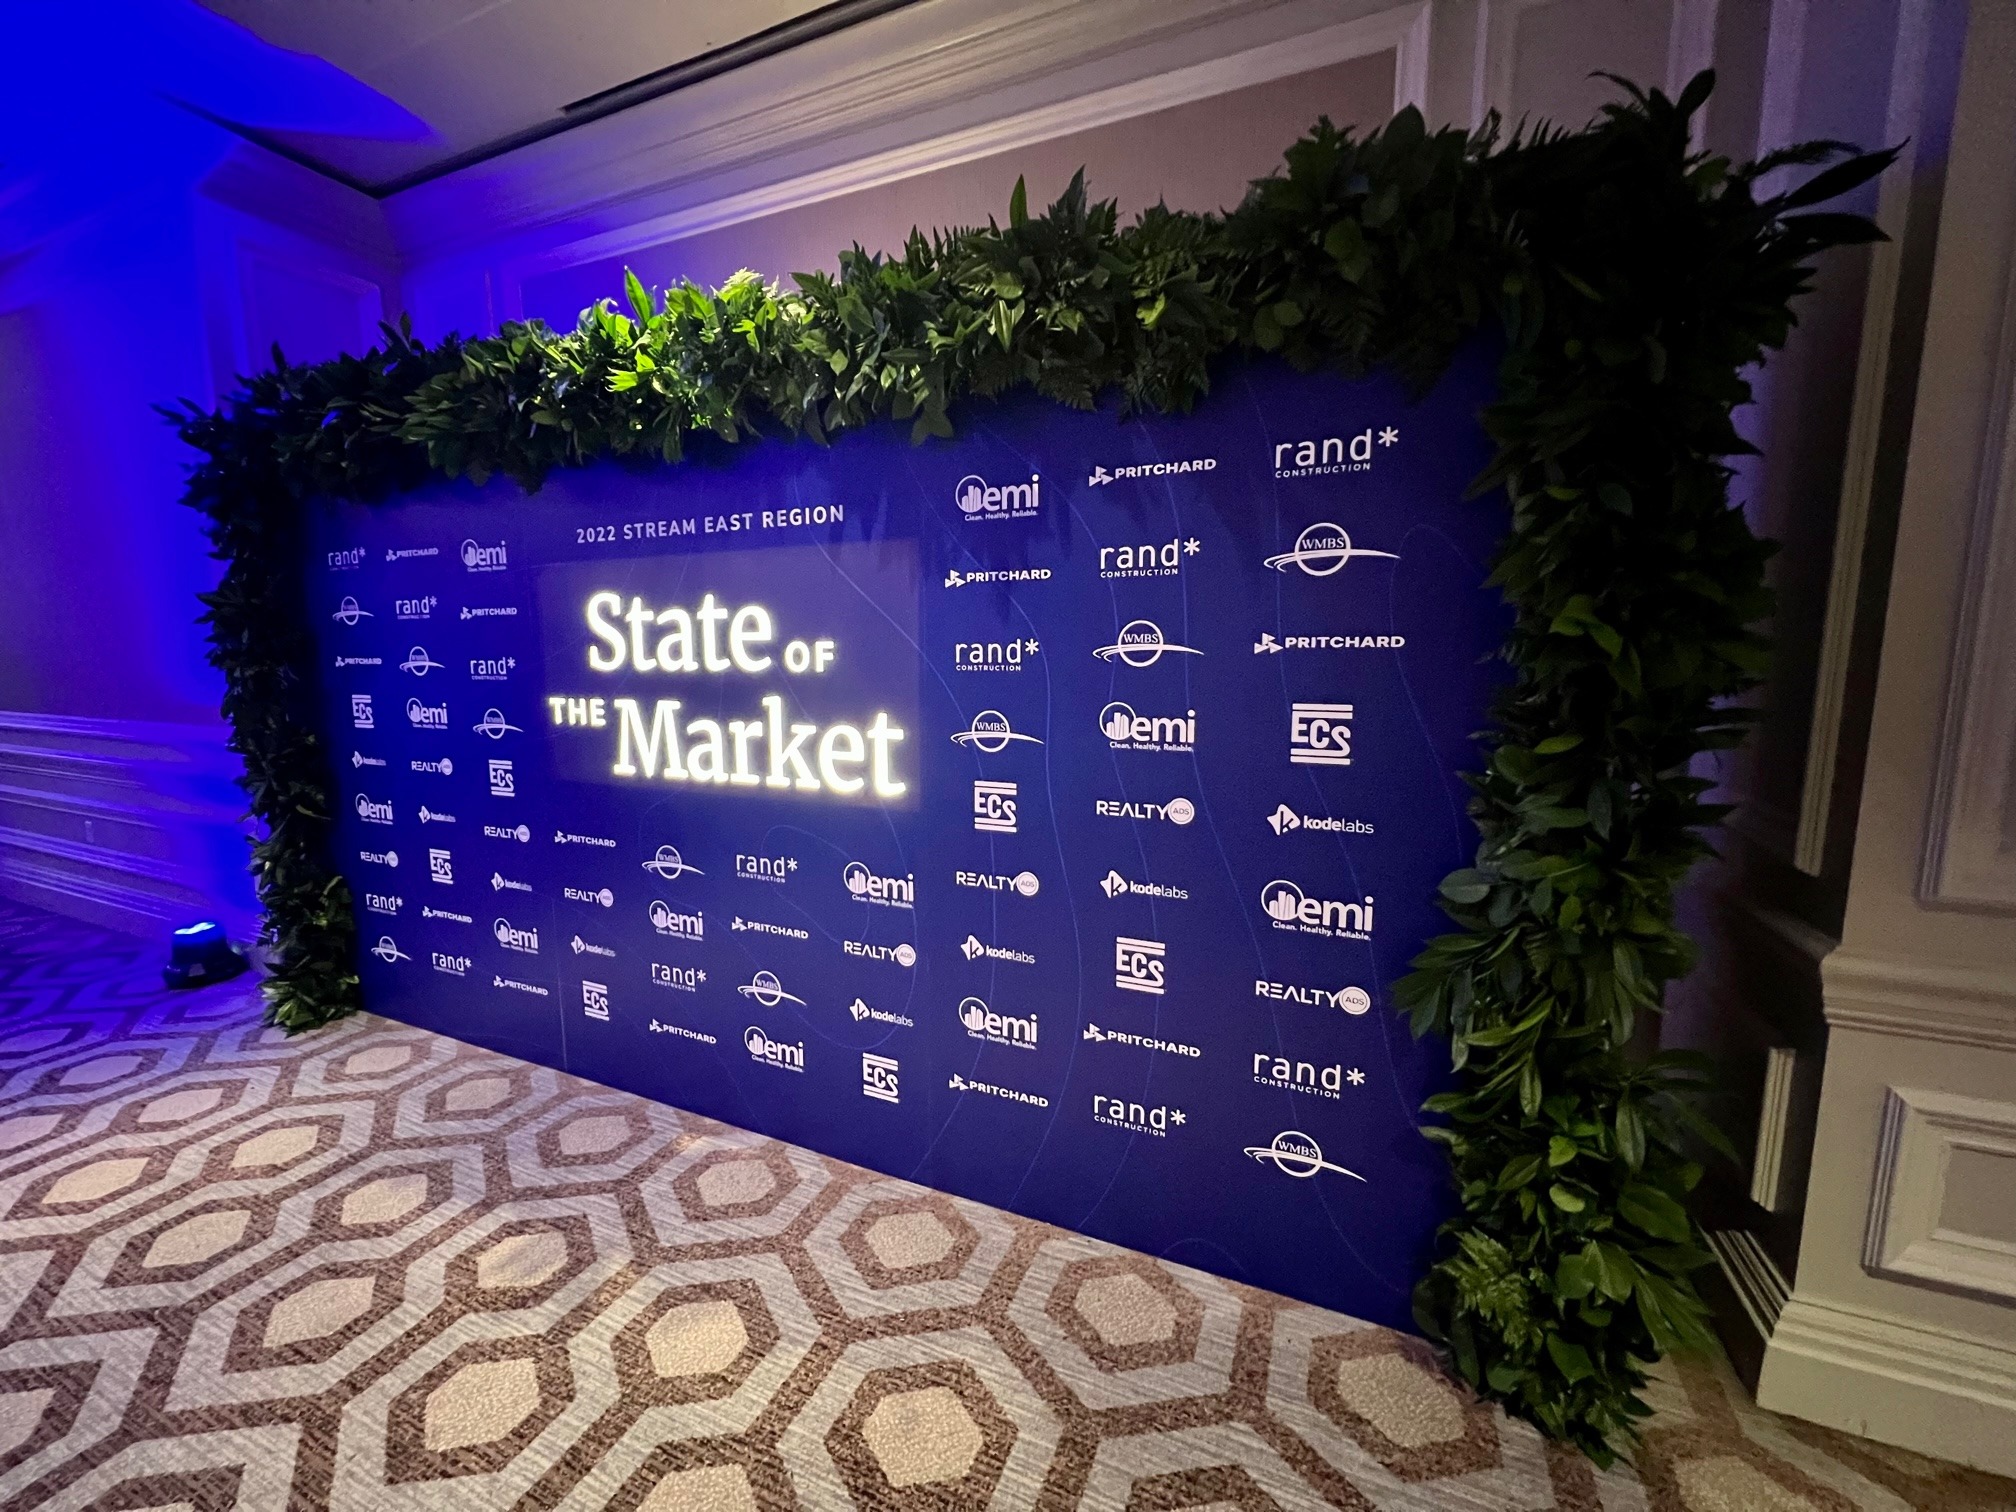 Streams East State Of The Market Event Offers Networking Opportunities, Insight Into Commercial Real Estate Trends Stream Realty Partners